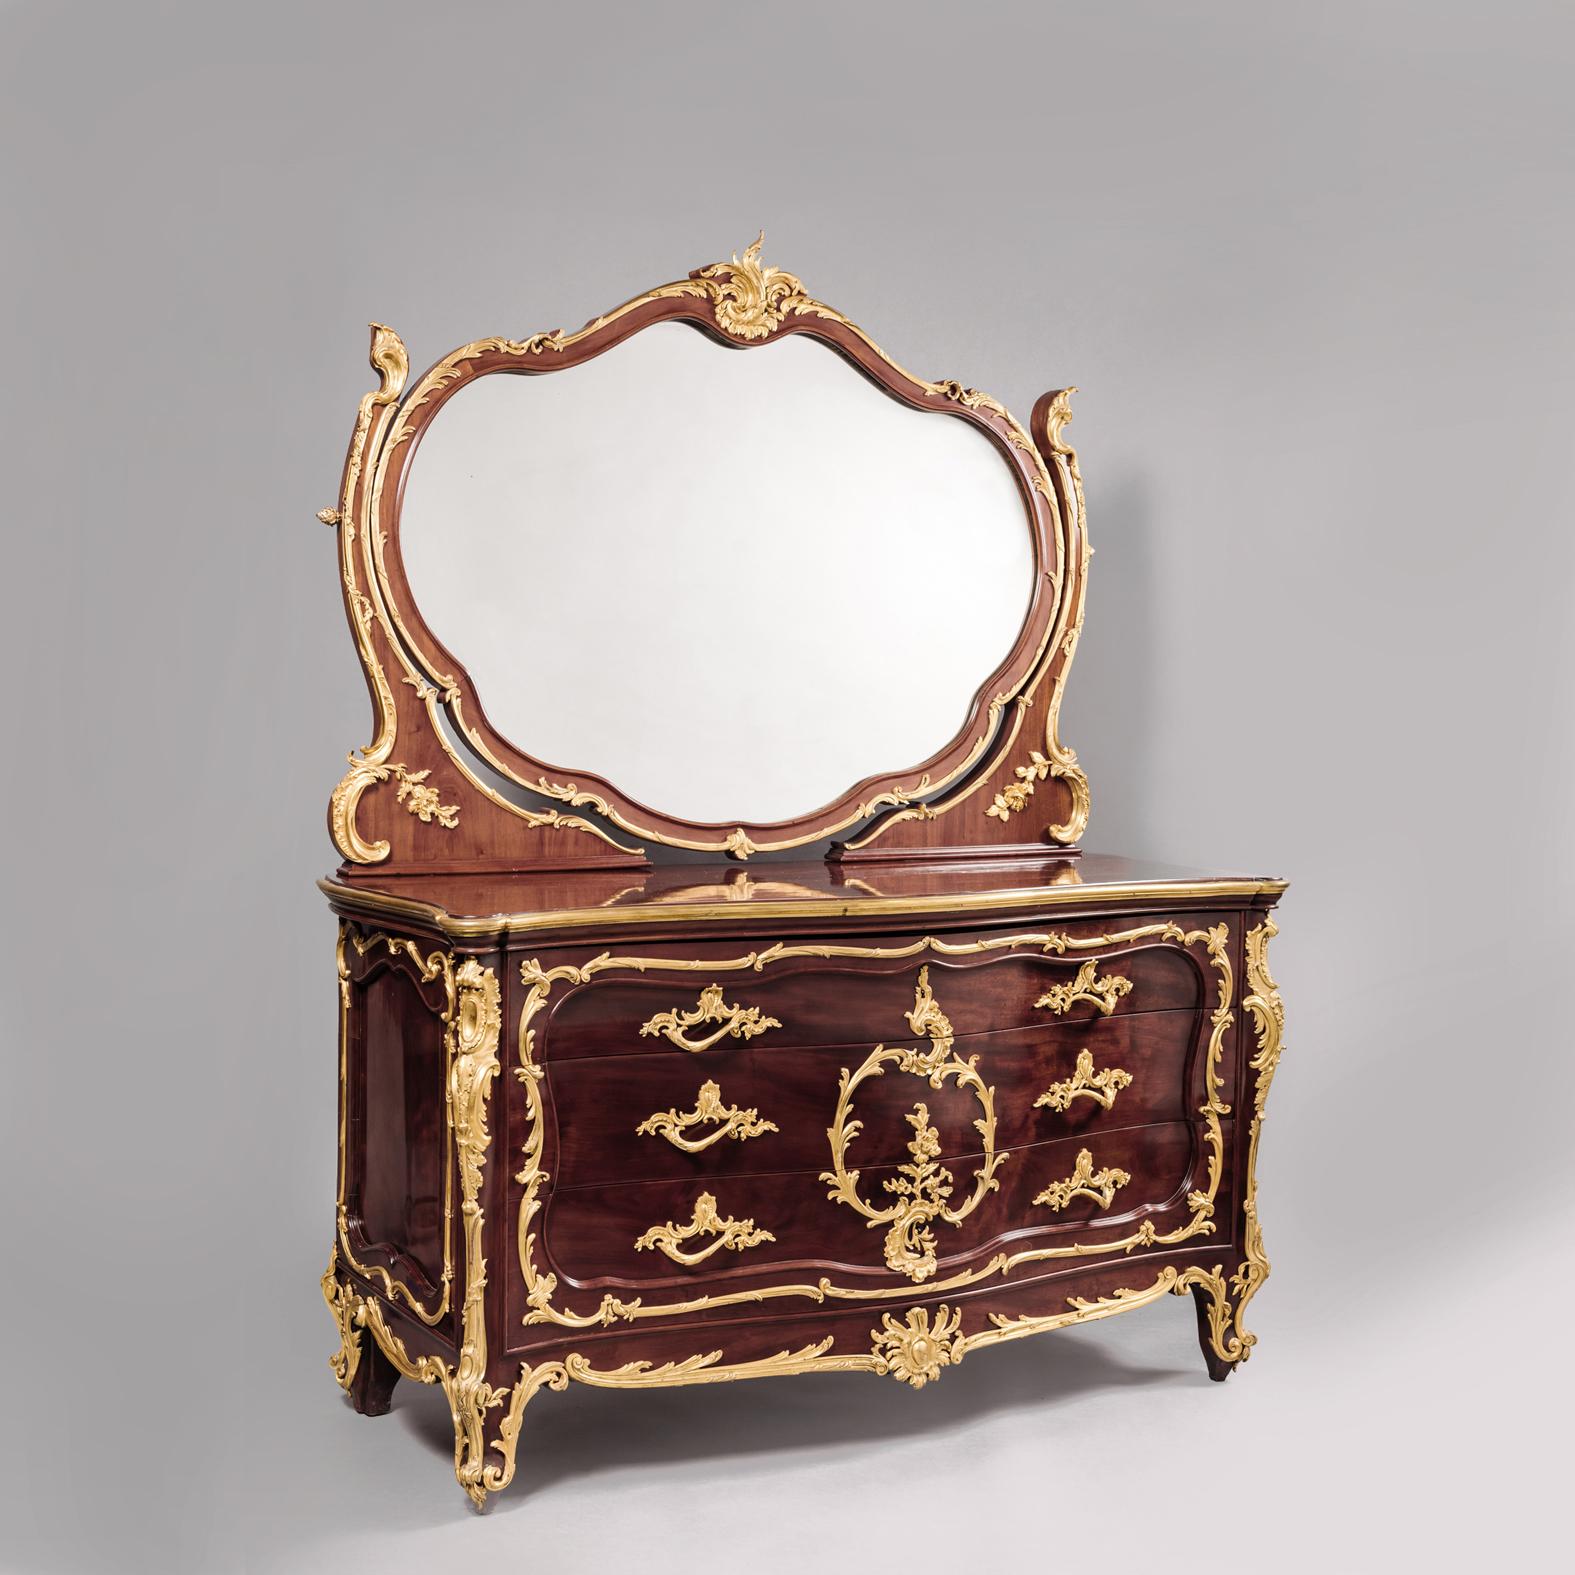 A Louis XV style gilt bronze mounted mahogany dressing table attributed to François Linke.

Two lock plates stamped 'Ch. Leidenroth Paris ALF. Schmidt Suc'. 

François Linke 

François Linke (1855-1946) was the most important Parisian cabinet